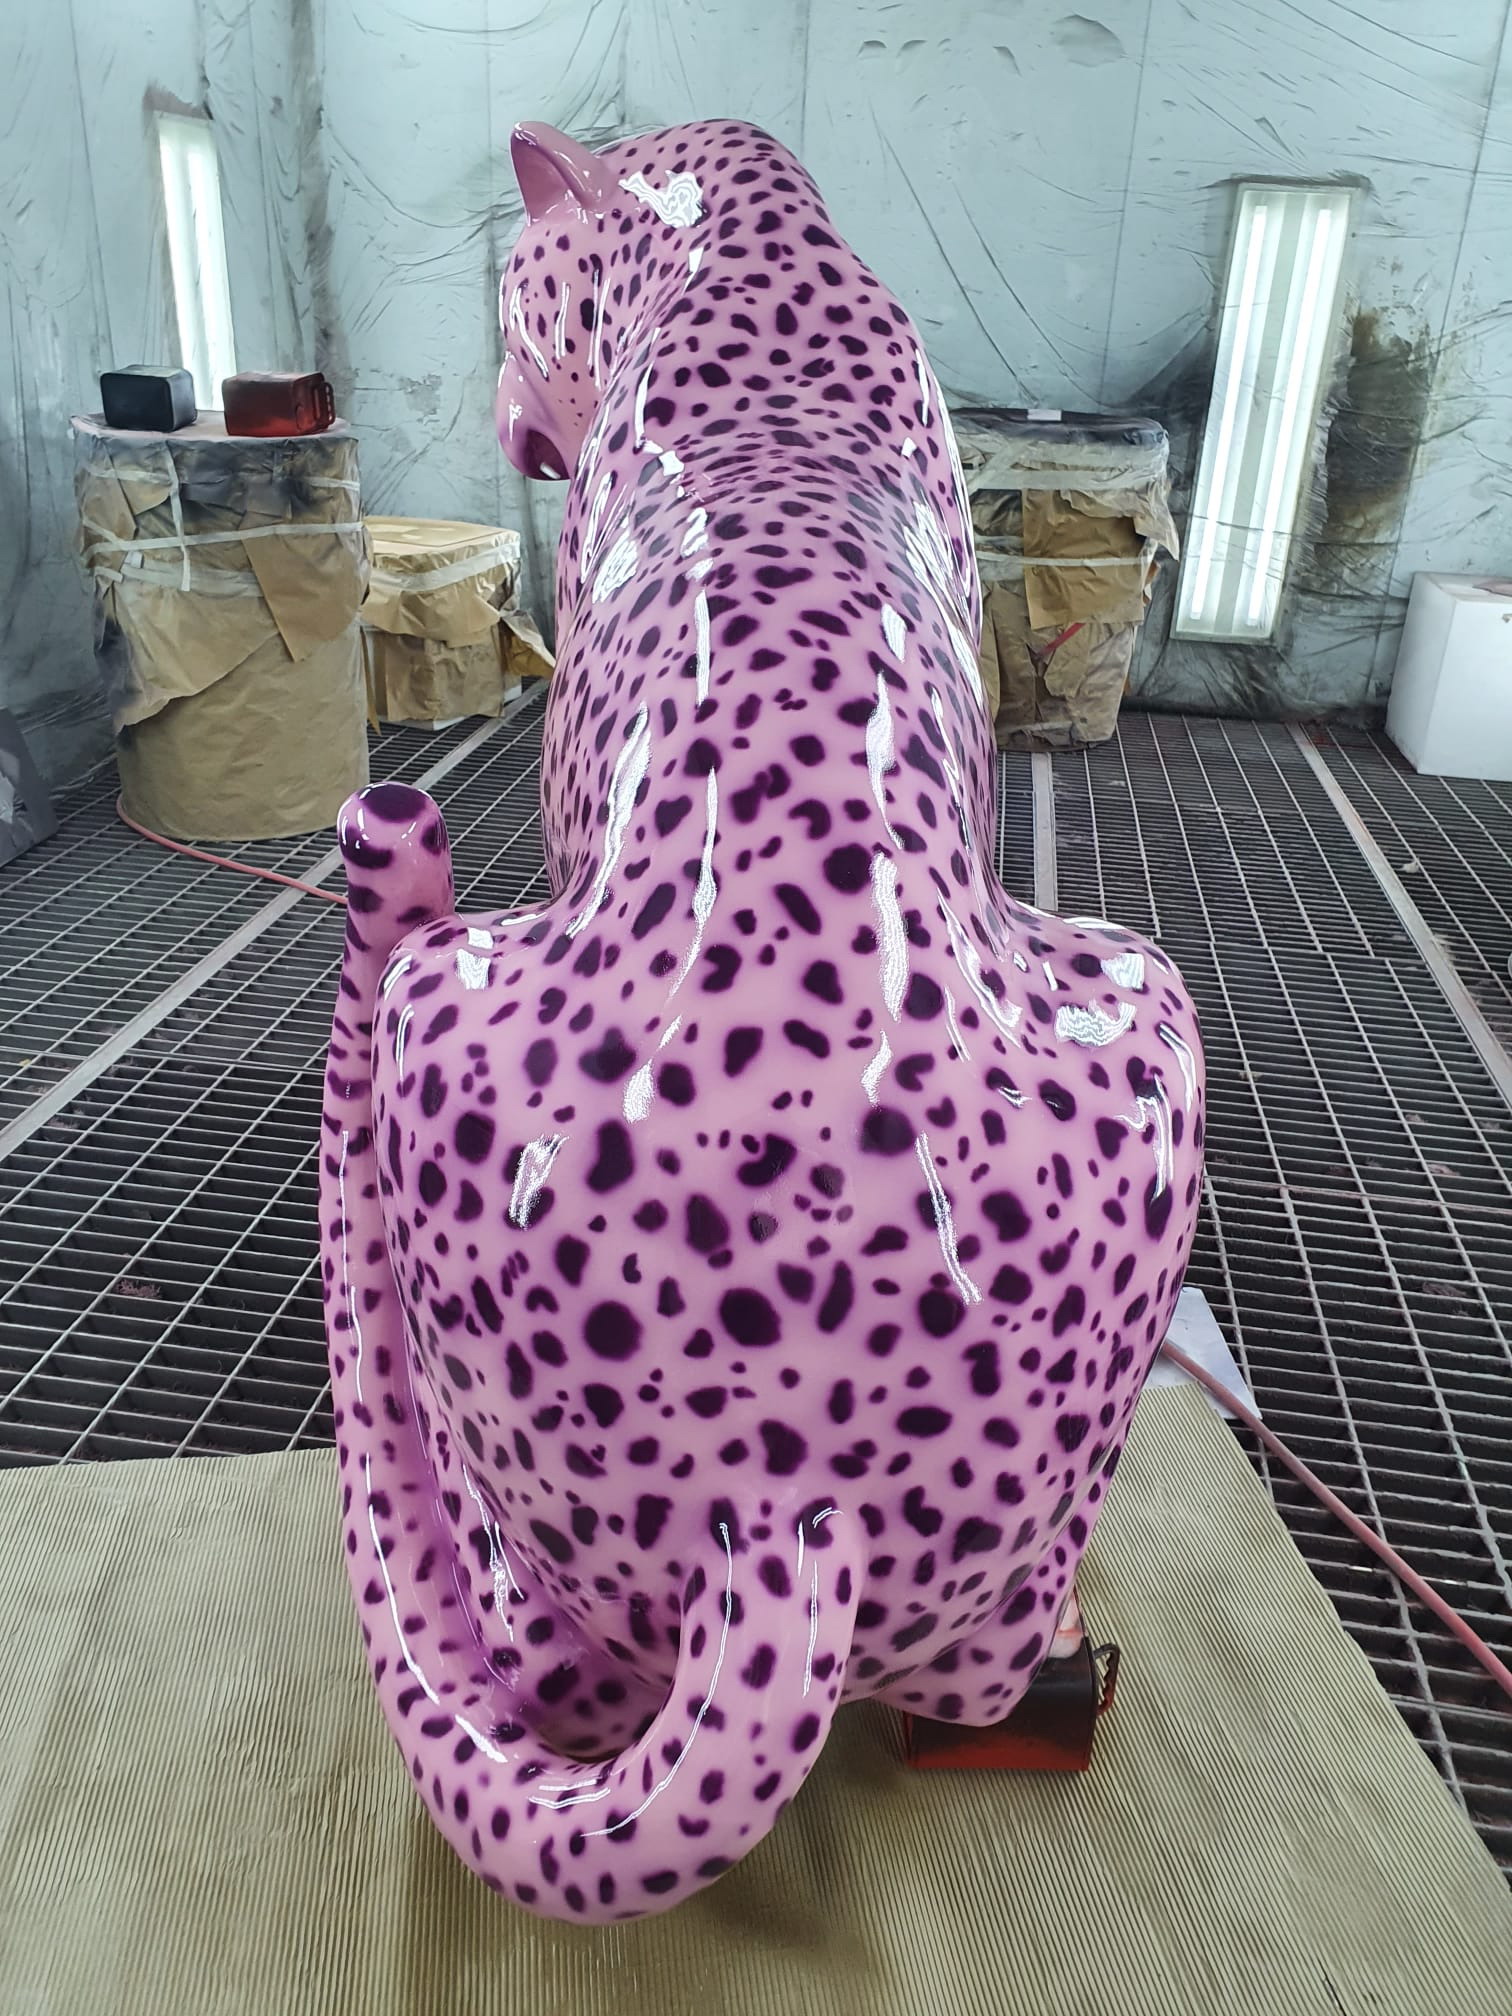 Panther From Miley Cyrus Music Video-3DFORMeu